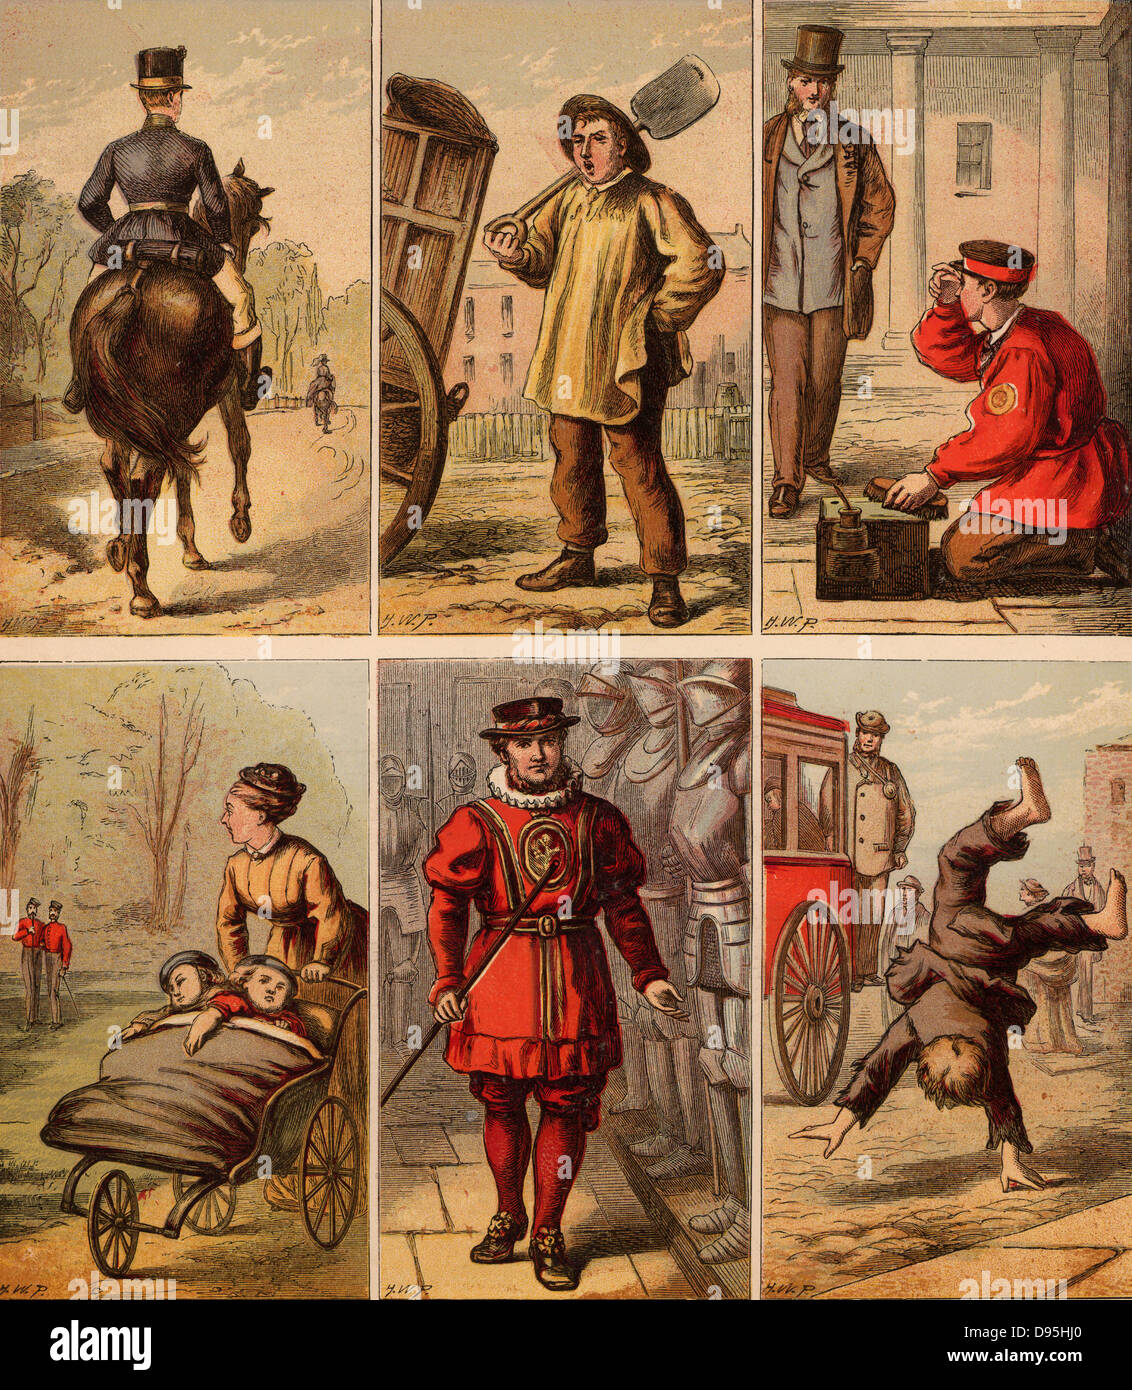 London street scenes.  Groom: Dustman: Bootblack: Nursemaid (eyeing up soldiers): Beefeater: Boy turning somersaults for pennies. Illustrations by Horace William Petherick (1839-1919) for a children's book published London, c1875.  Chromolithograph. Stock Photo